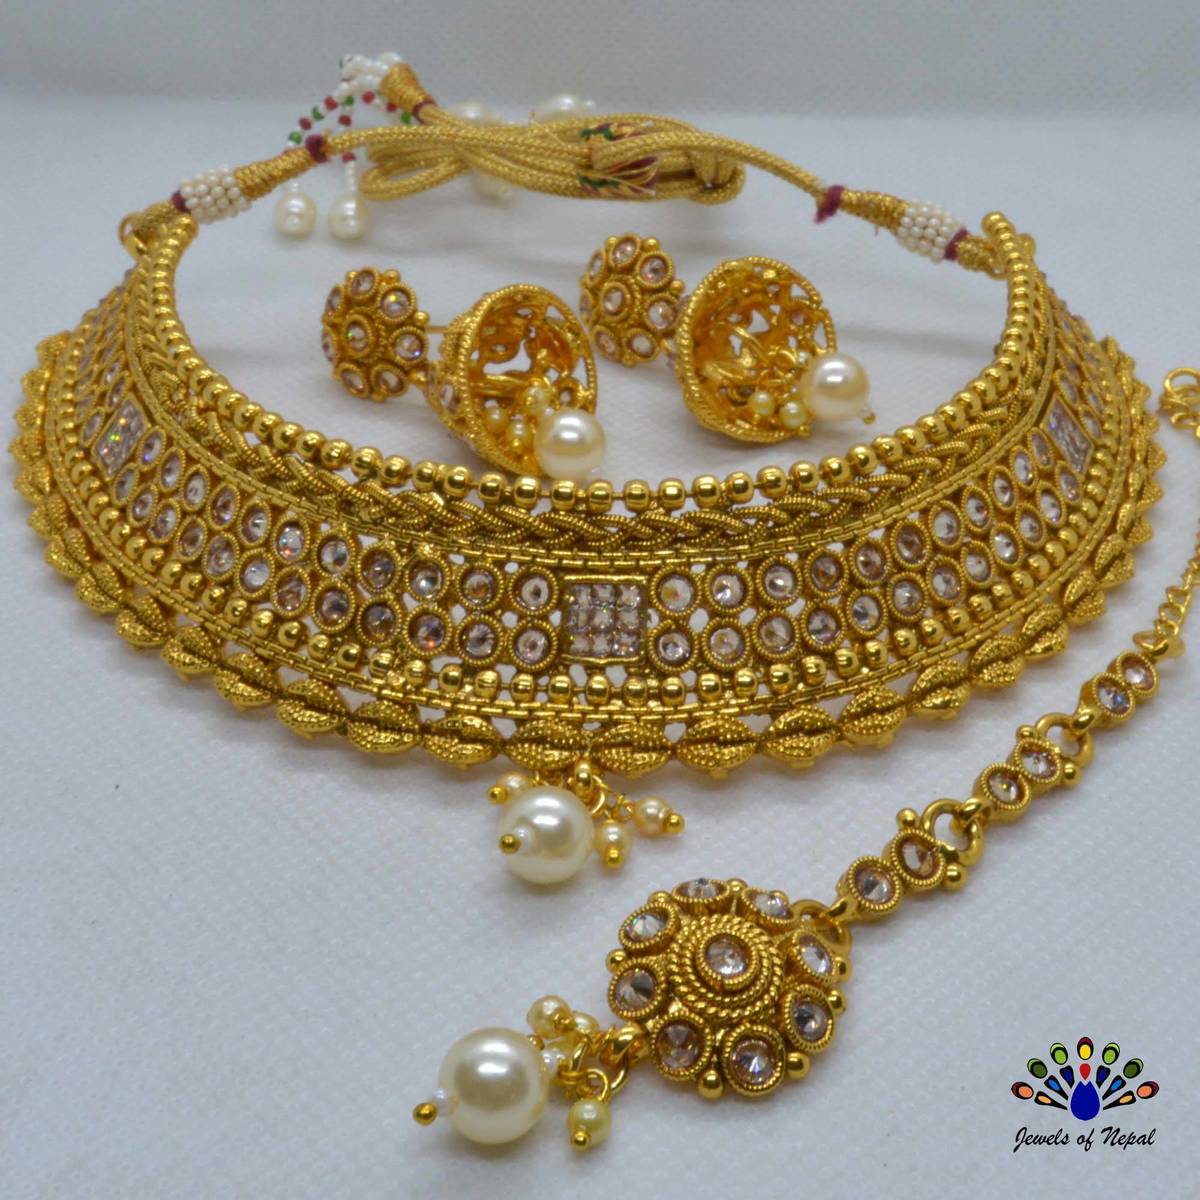 High Gold Faux Moti & Stones Embellished Choker Necklace Set With Adjustable Necklace Strap